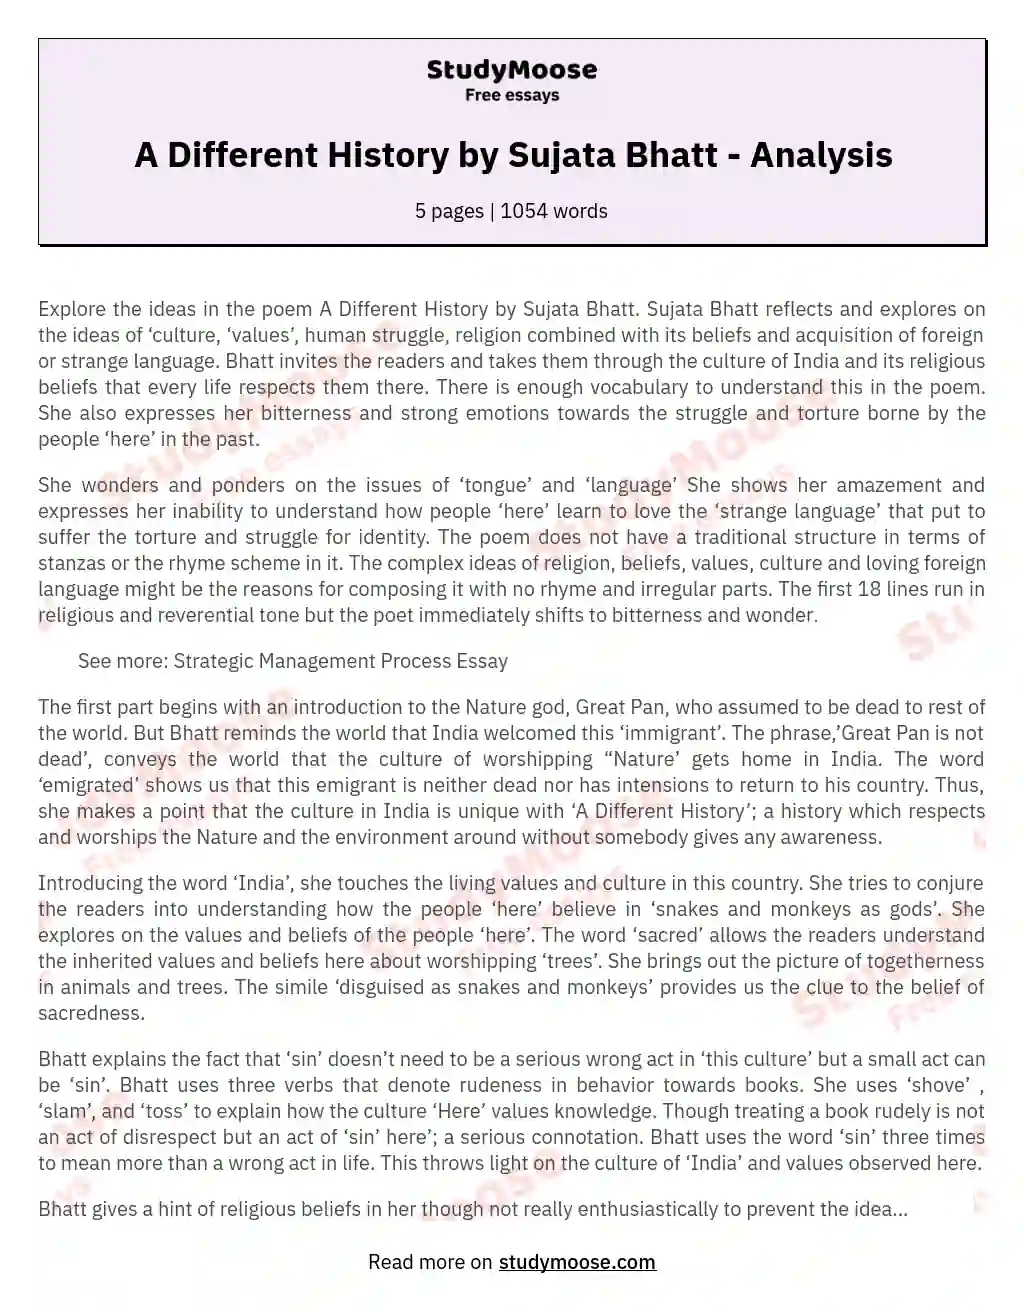 A Different History by Sujata Bhatt - Analysis essay